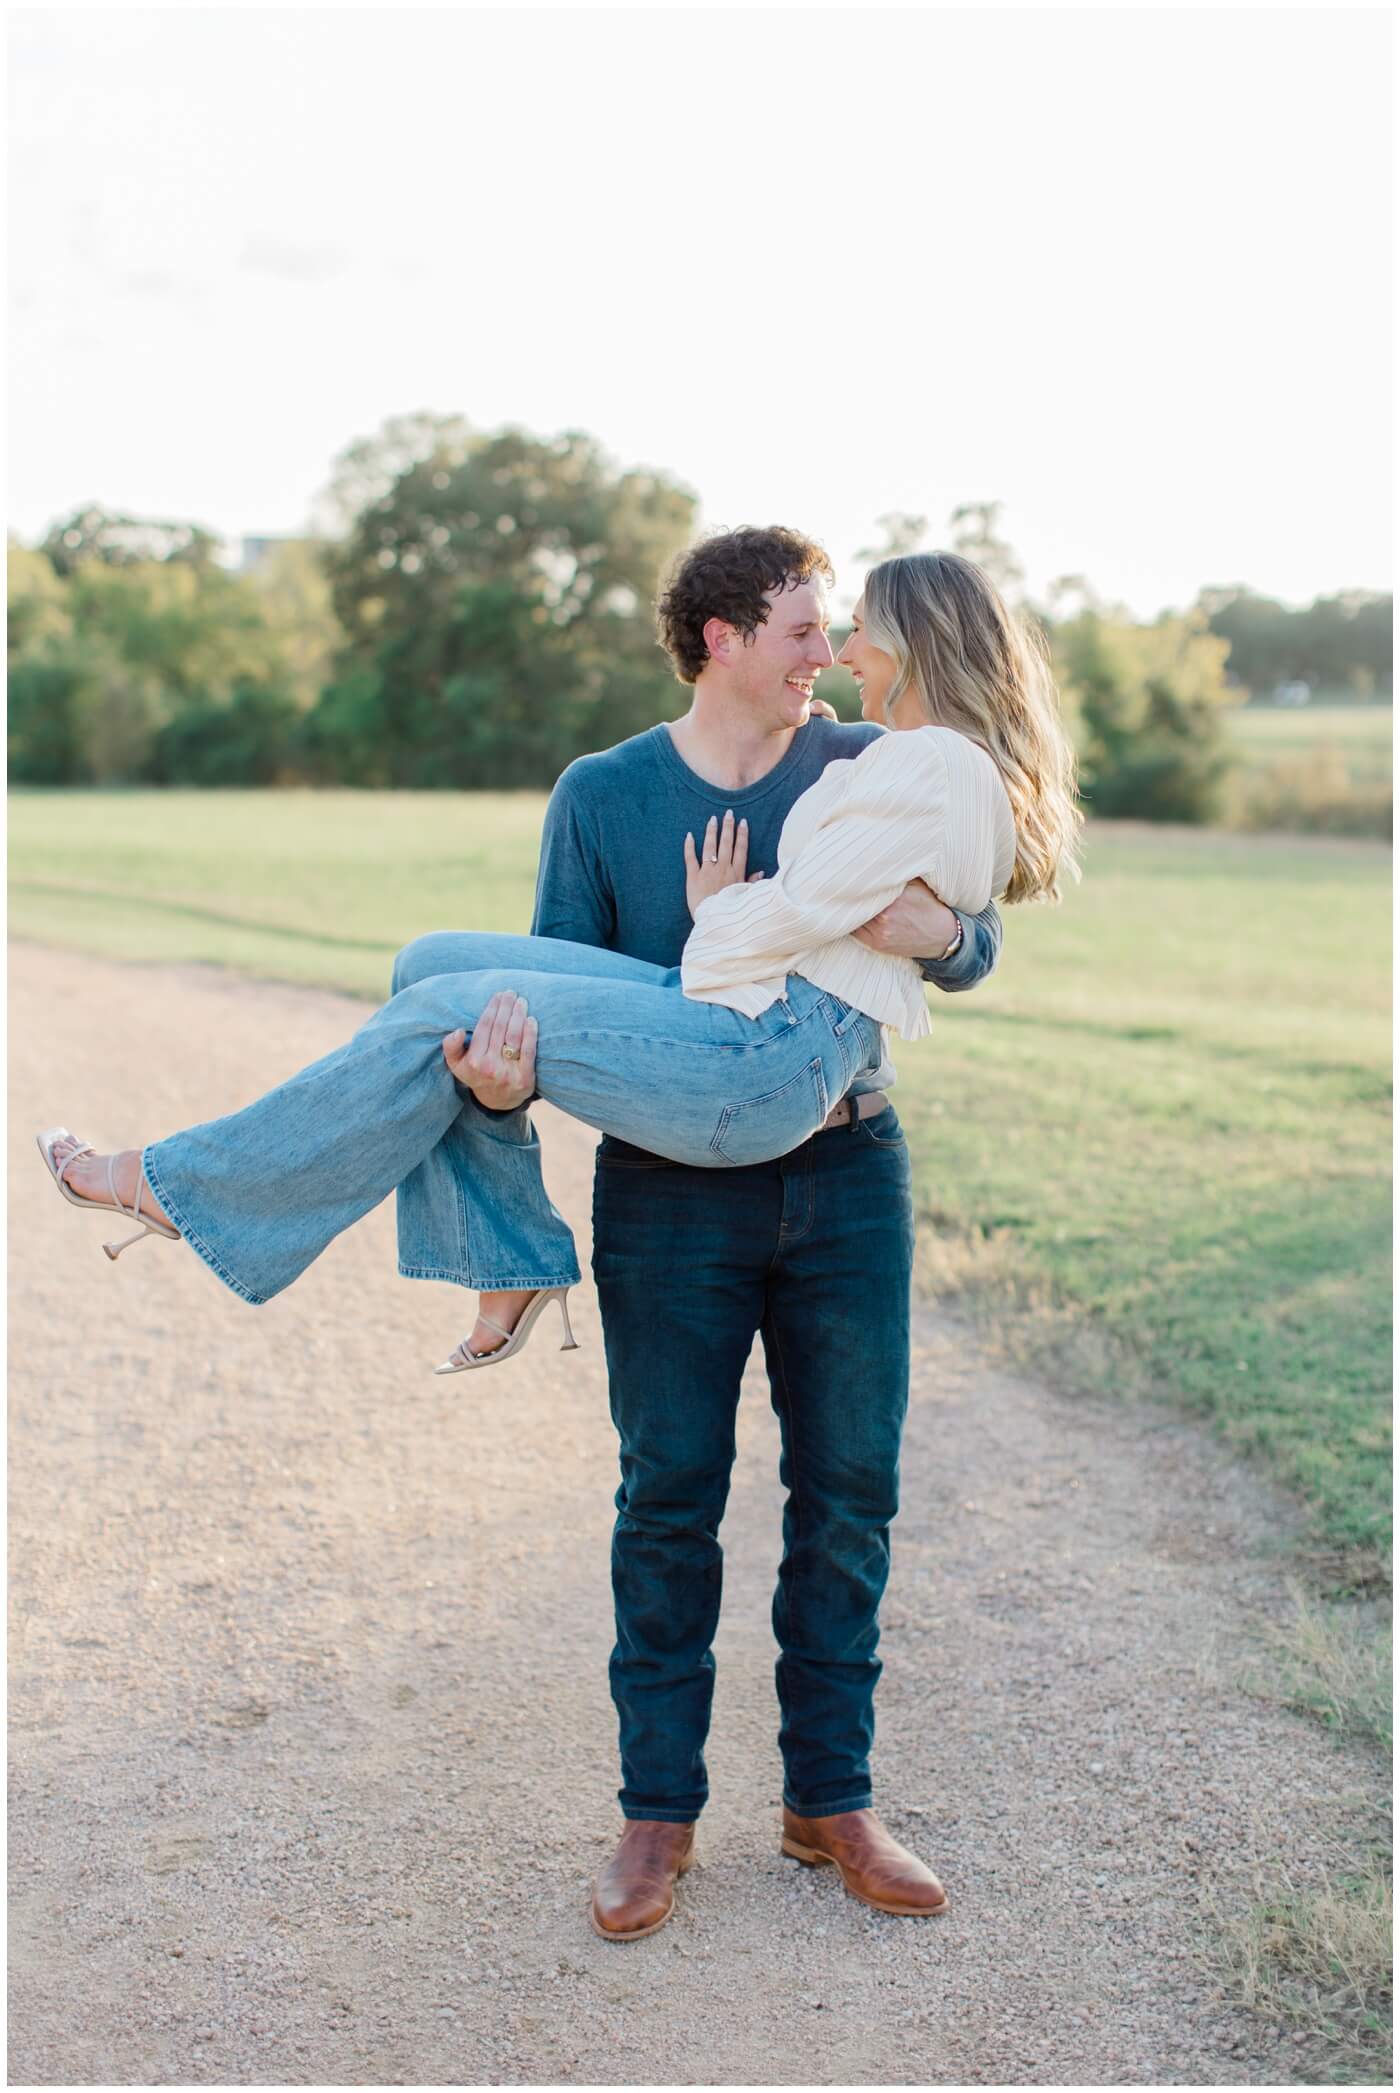 A man carries his fiance at their houston engagement session